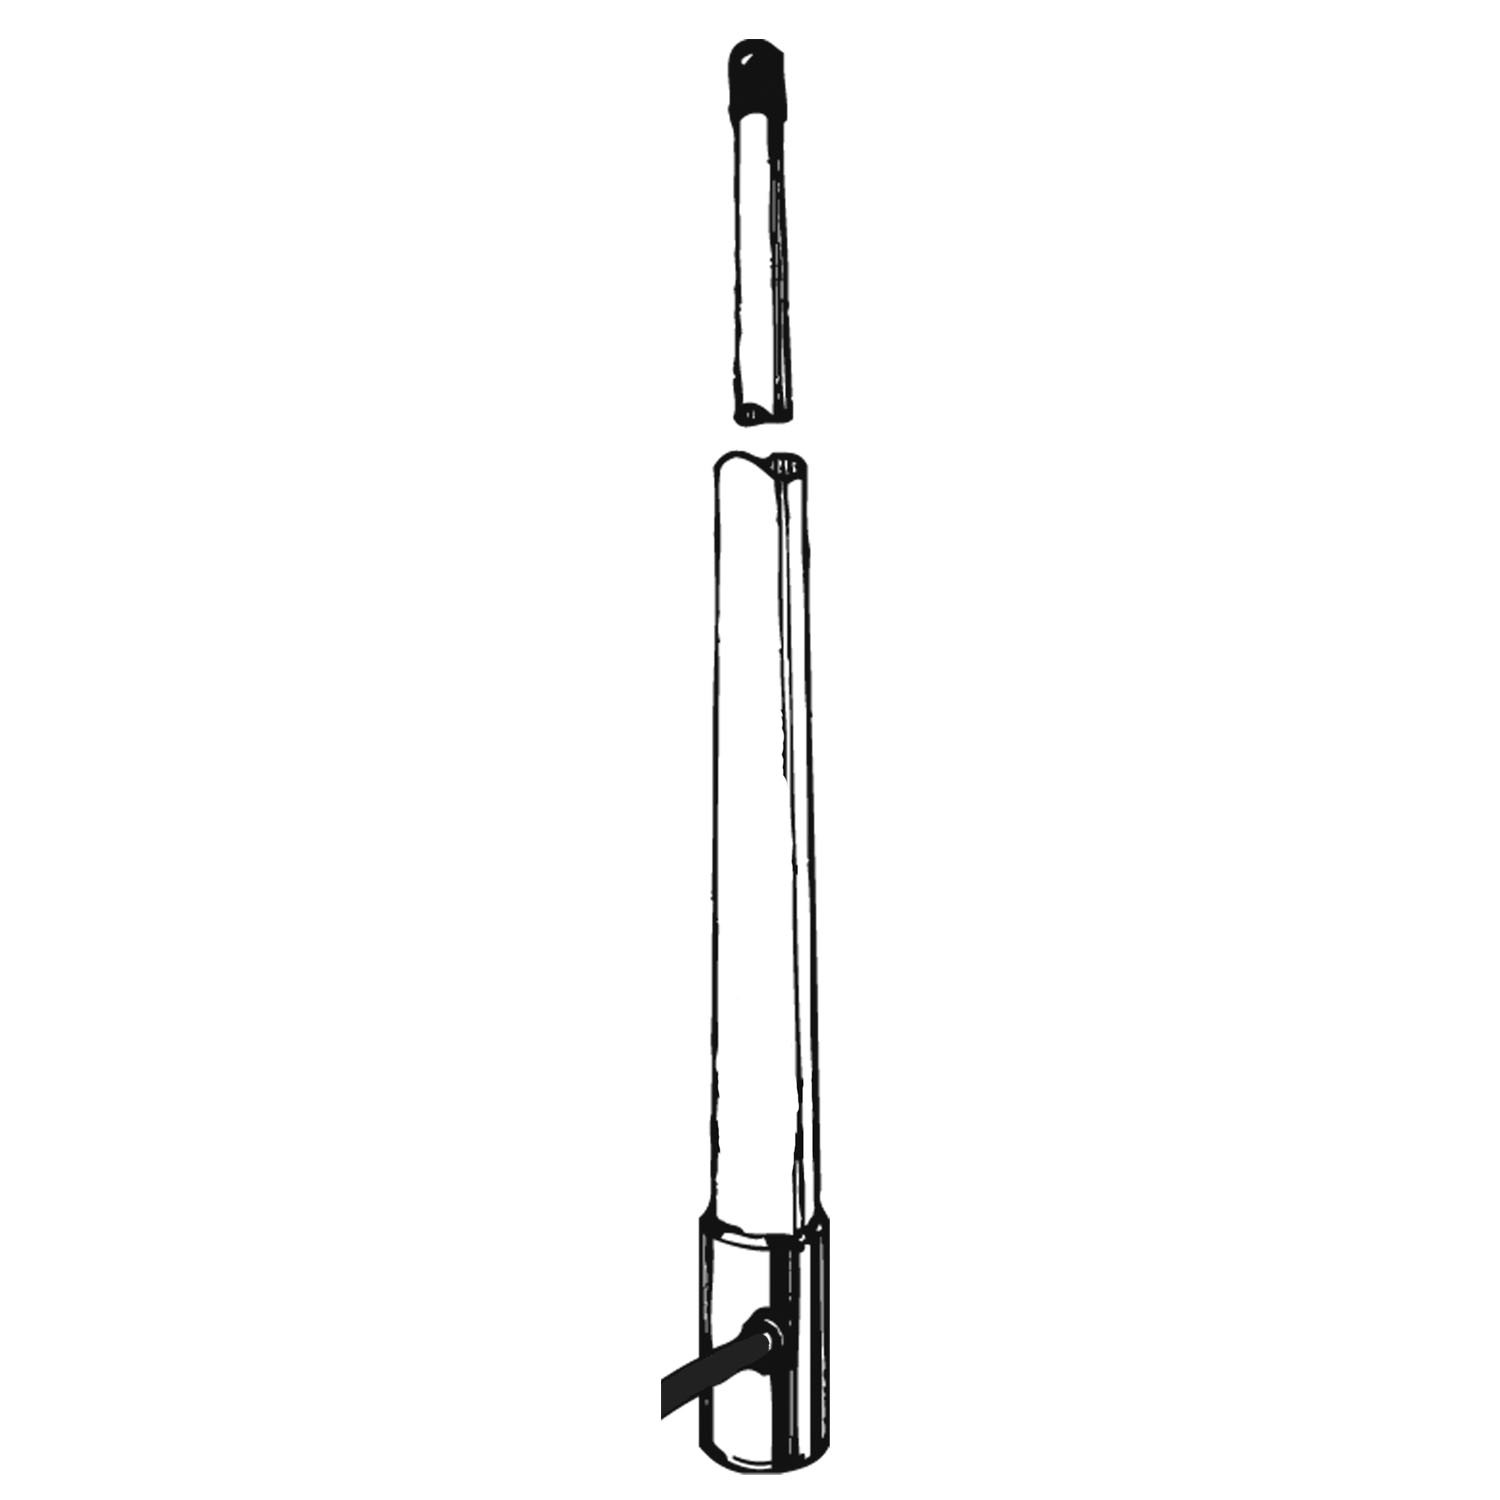 Valor - 8' Cb/Vhf Marine Combo Antenna With 1/4" X 20" Standard Threaded Base, 20' Coax Cable And Connector